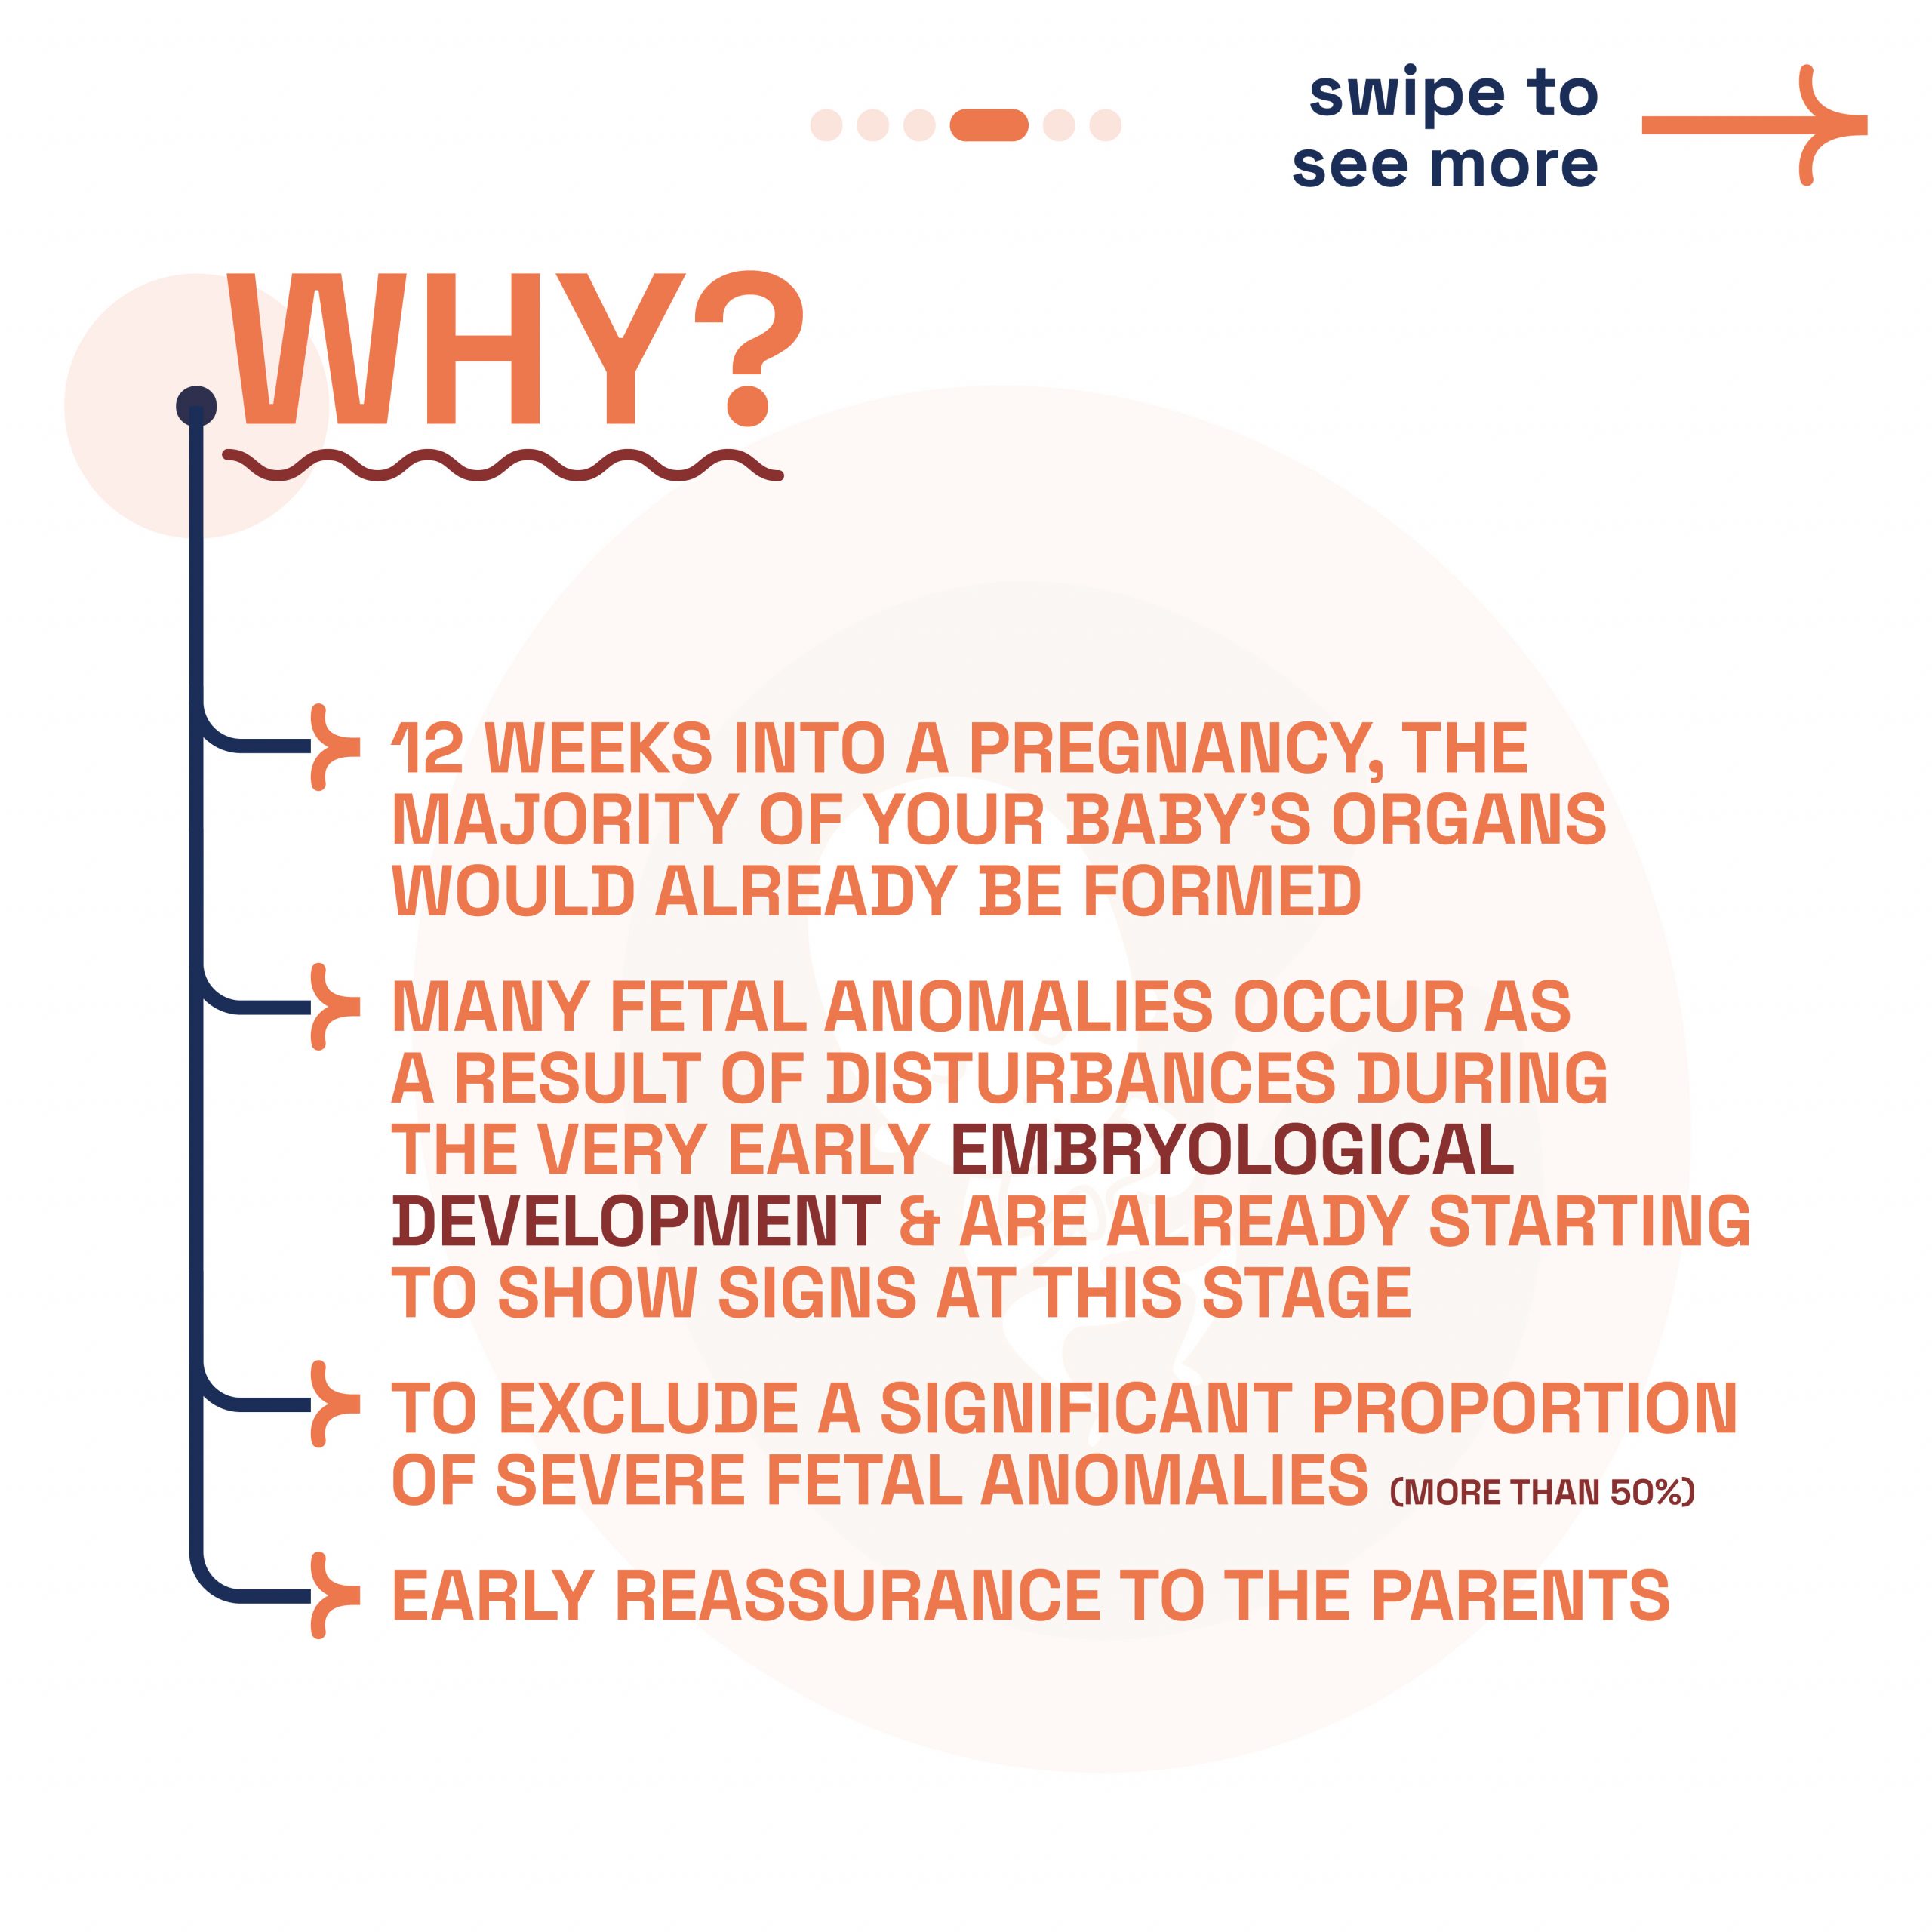 Informative diagram showcasing the reasons for early fetal scanning at 12 weeks and its importance in detecting fetal anomalies.